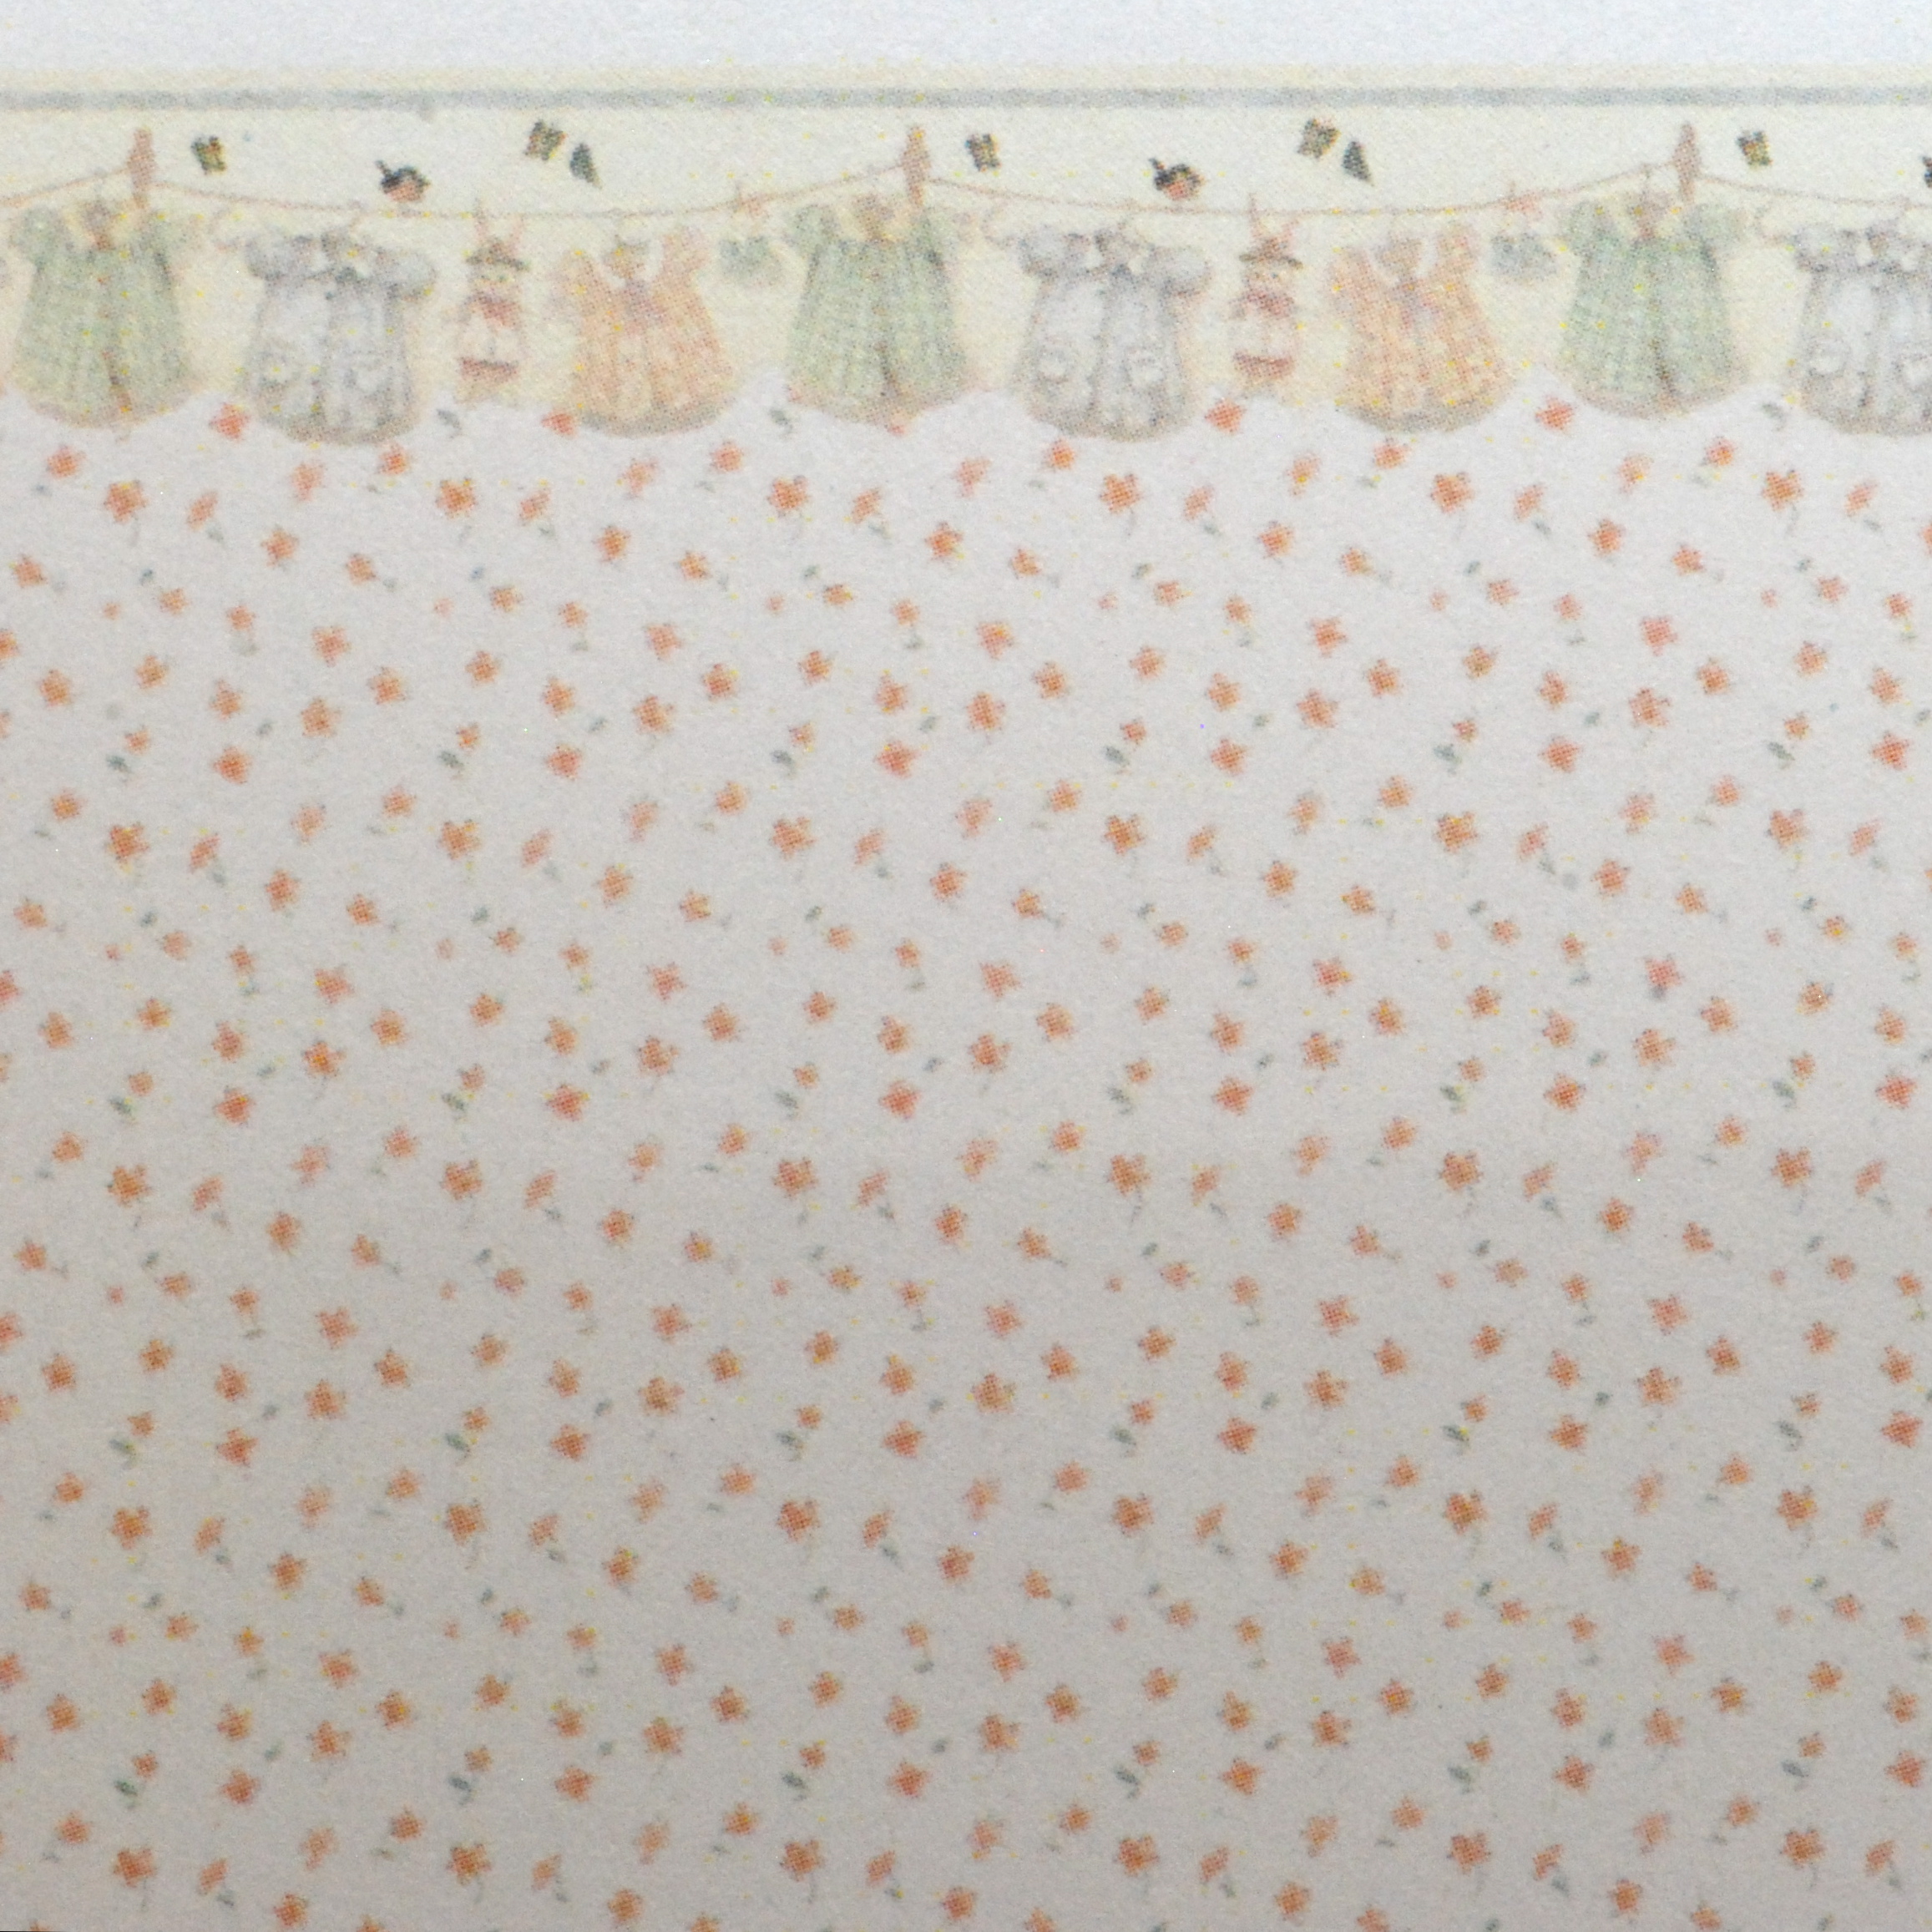 Free download 48 Wallpaper Baby Clothes Stewart Dollhouse Creations [2314x2314] for your Desktop, Mobile & Tablet. Explore Clothes Wallpaper. Fashion Desktop Wallpaper, Anthropologie Wallpaper Sale, Clothesline Laundry Room Border Wallpaper